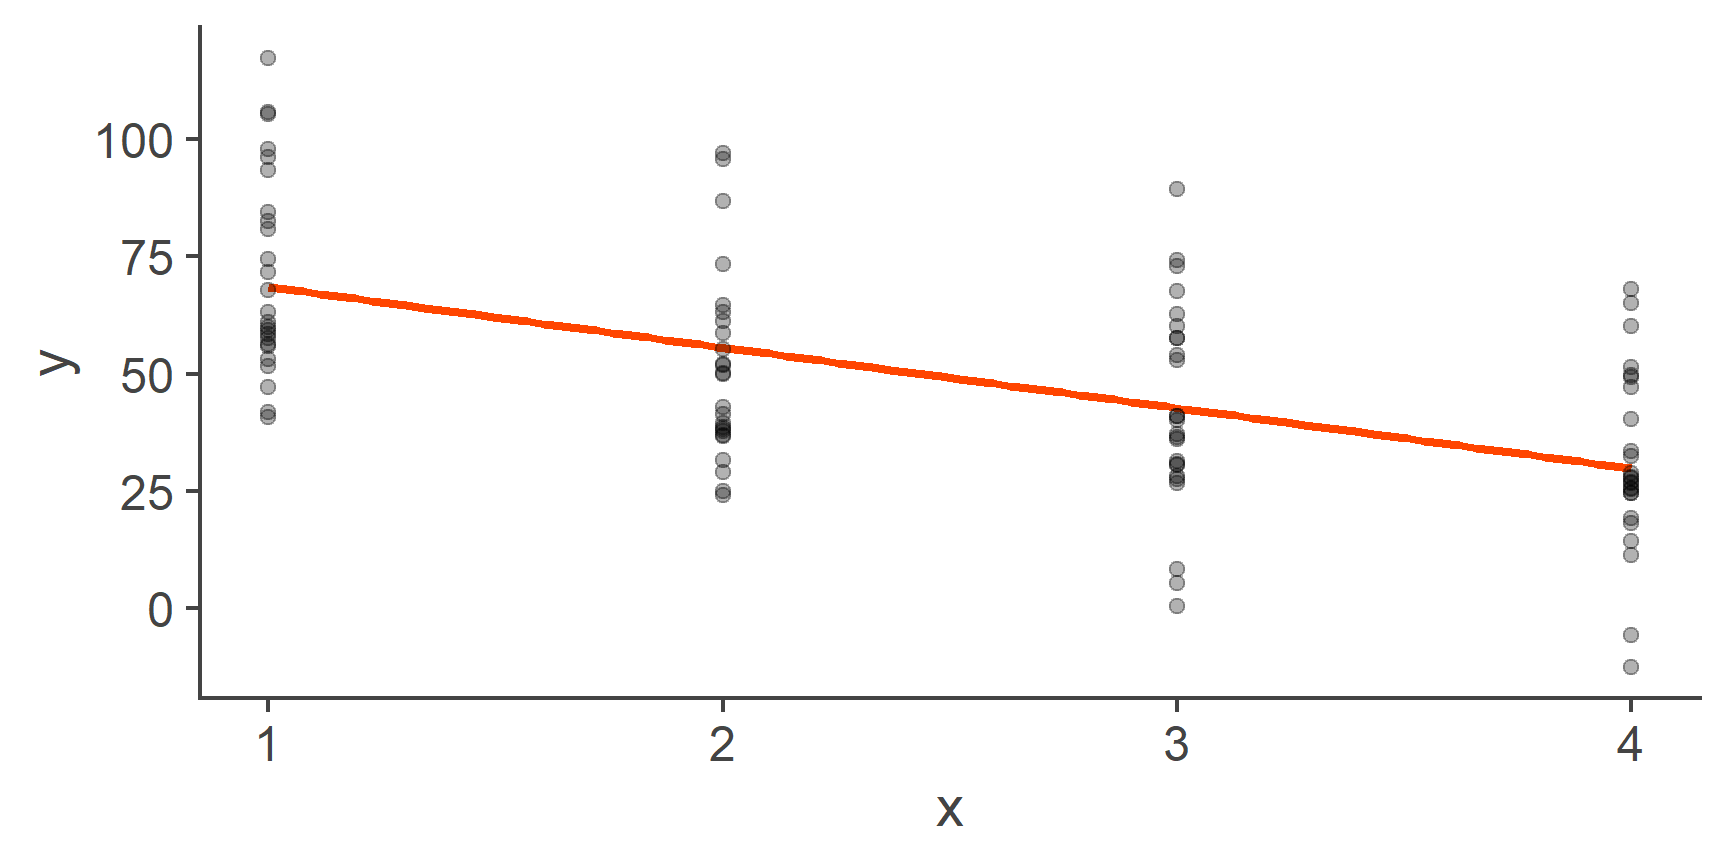 Fitting a line through categorical data (repeat)